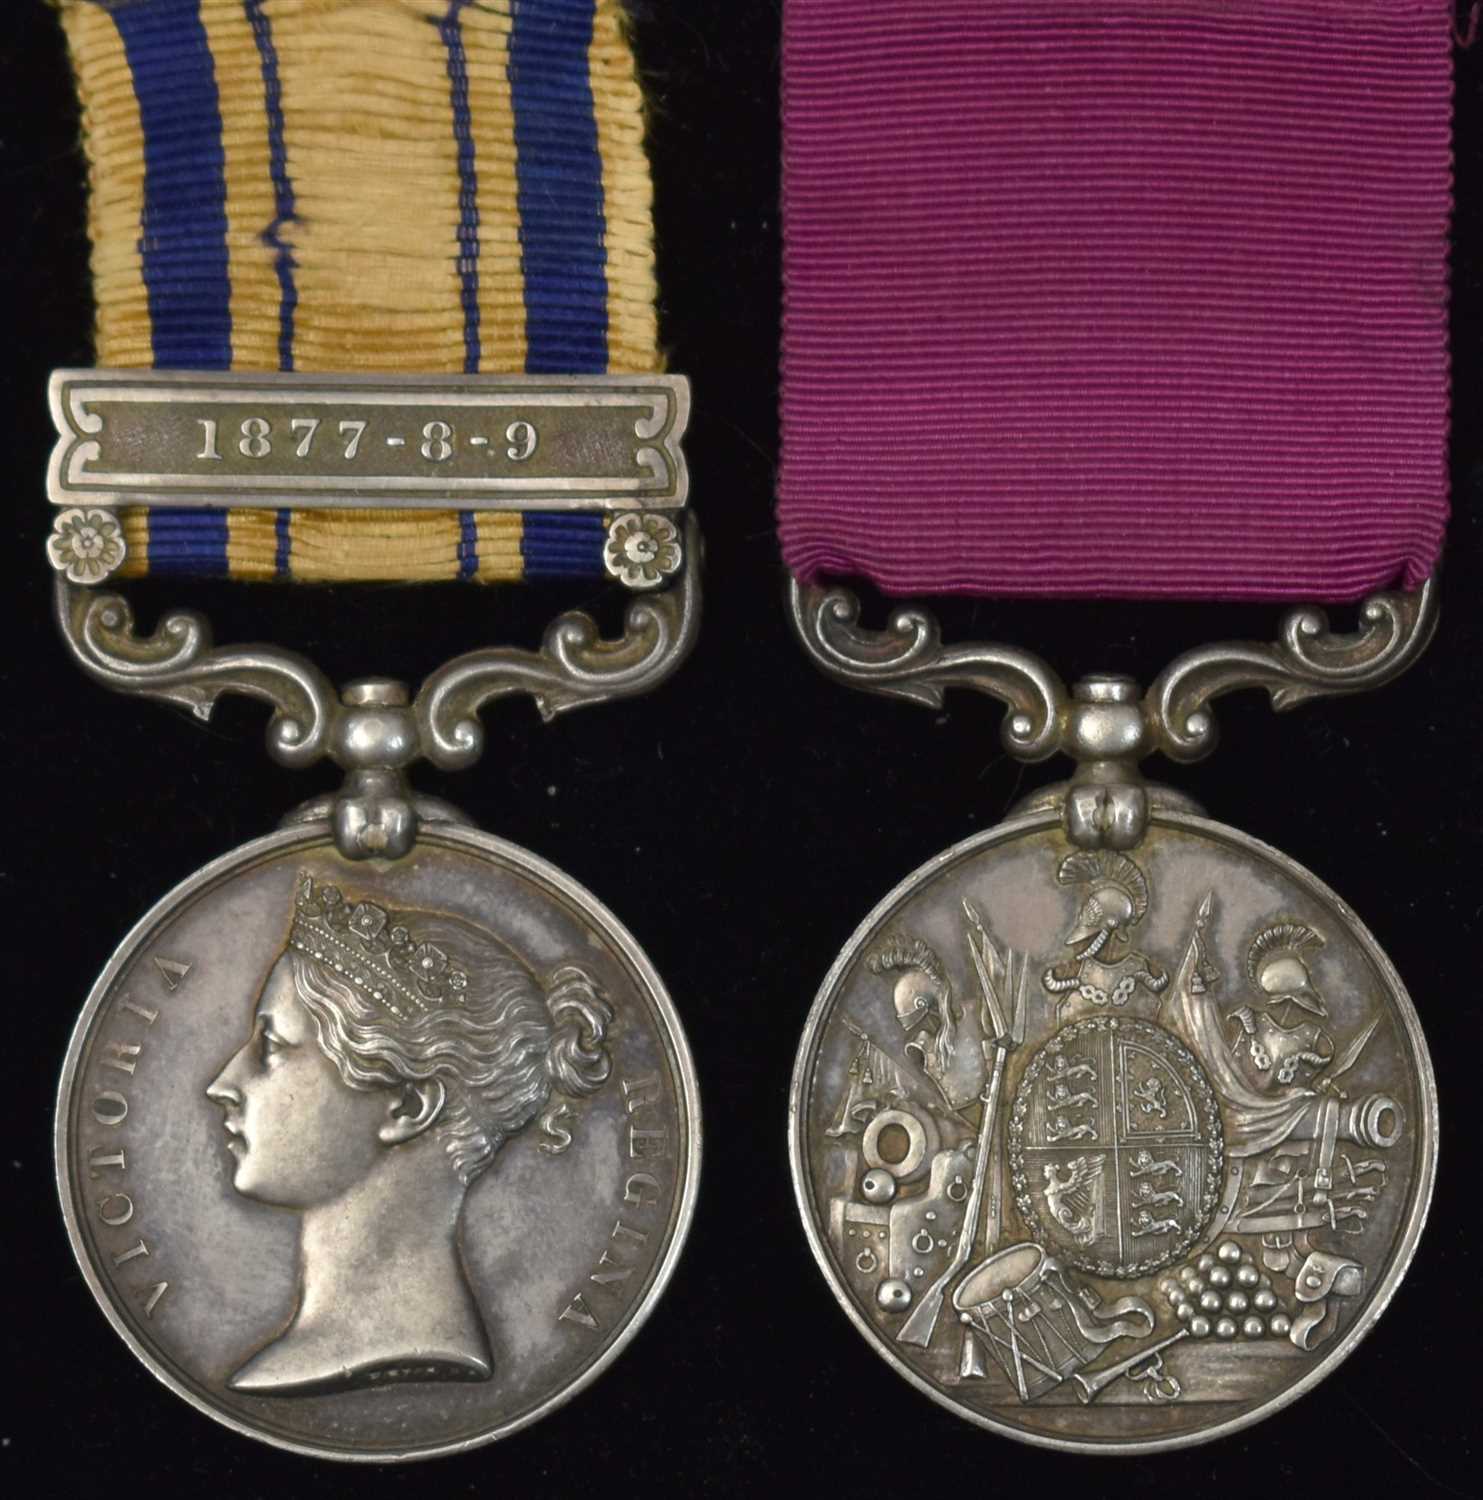 1775 - South Africa and Long Service medal